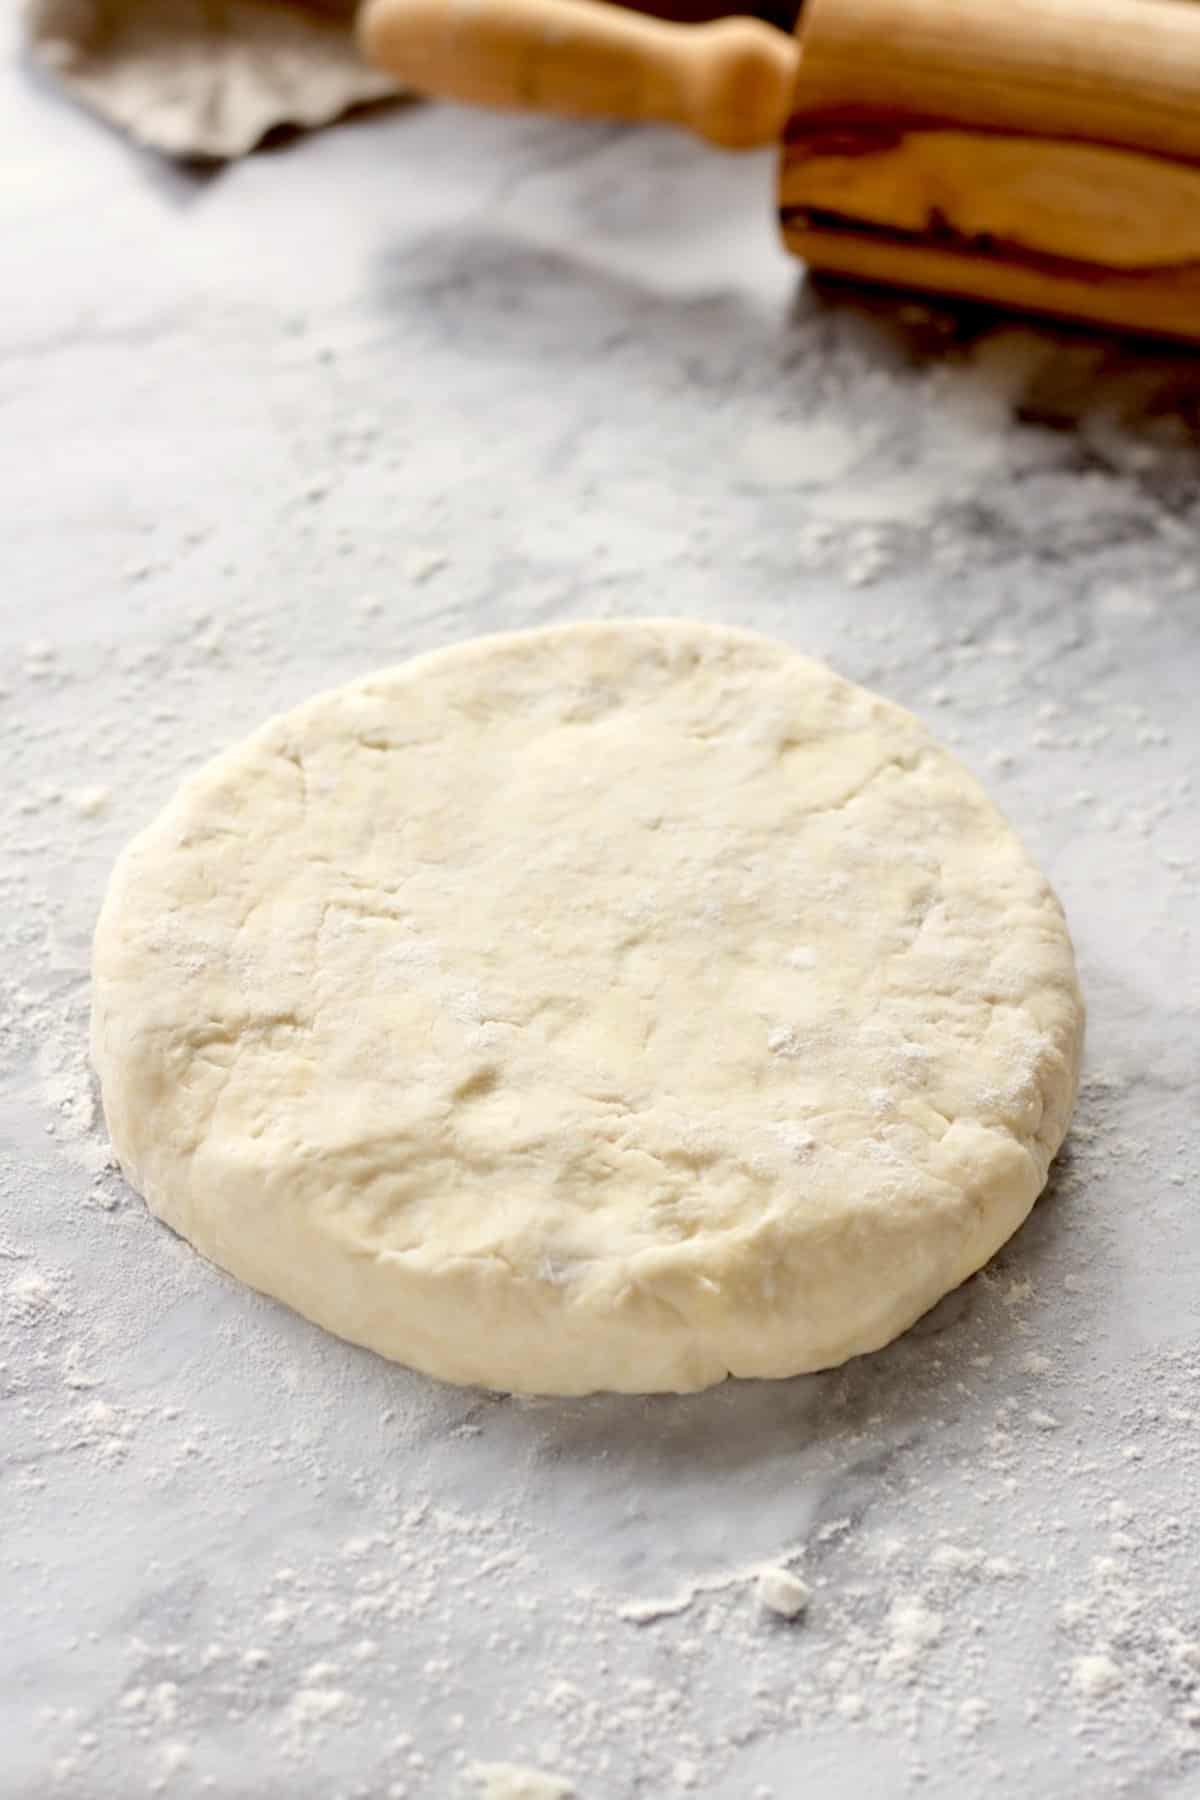 Disc of raw cream cheese pie dough on marble countertop with wooden rolling pin.